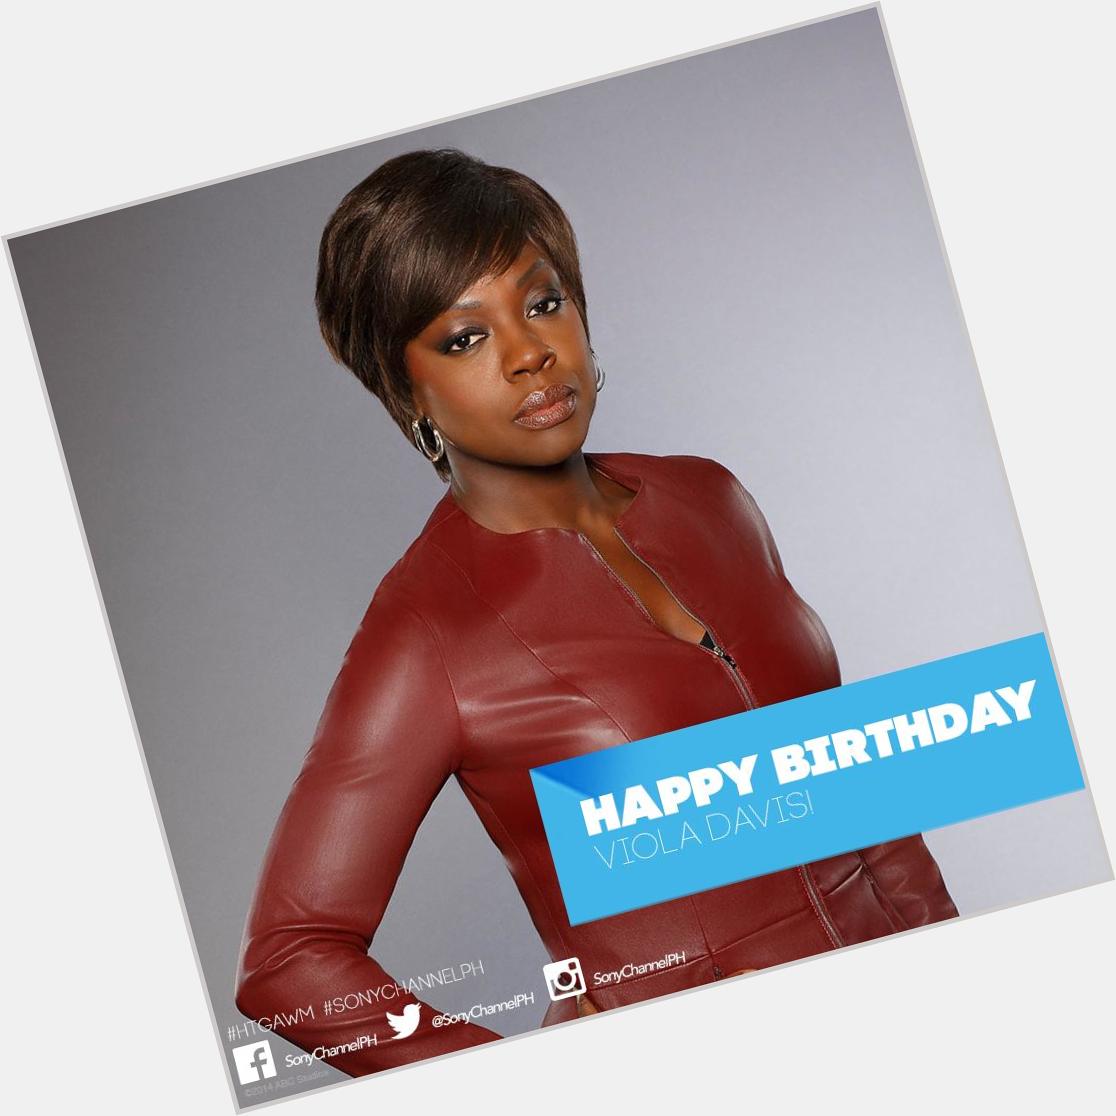 To this amazing actress and awe-inspiring woman, may you have a great day!

Happy birthday, Viola Davis! 